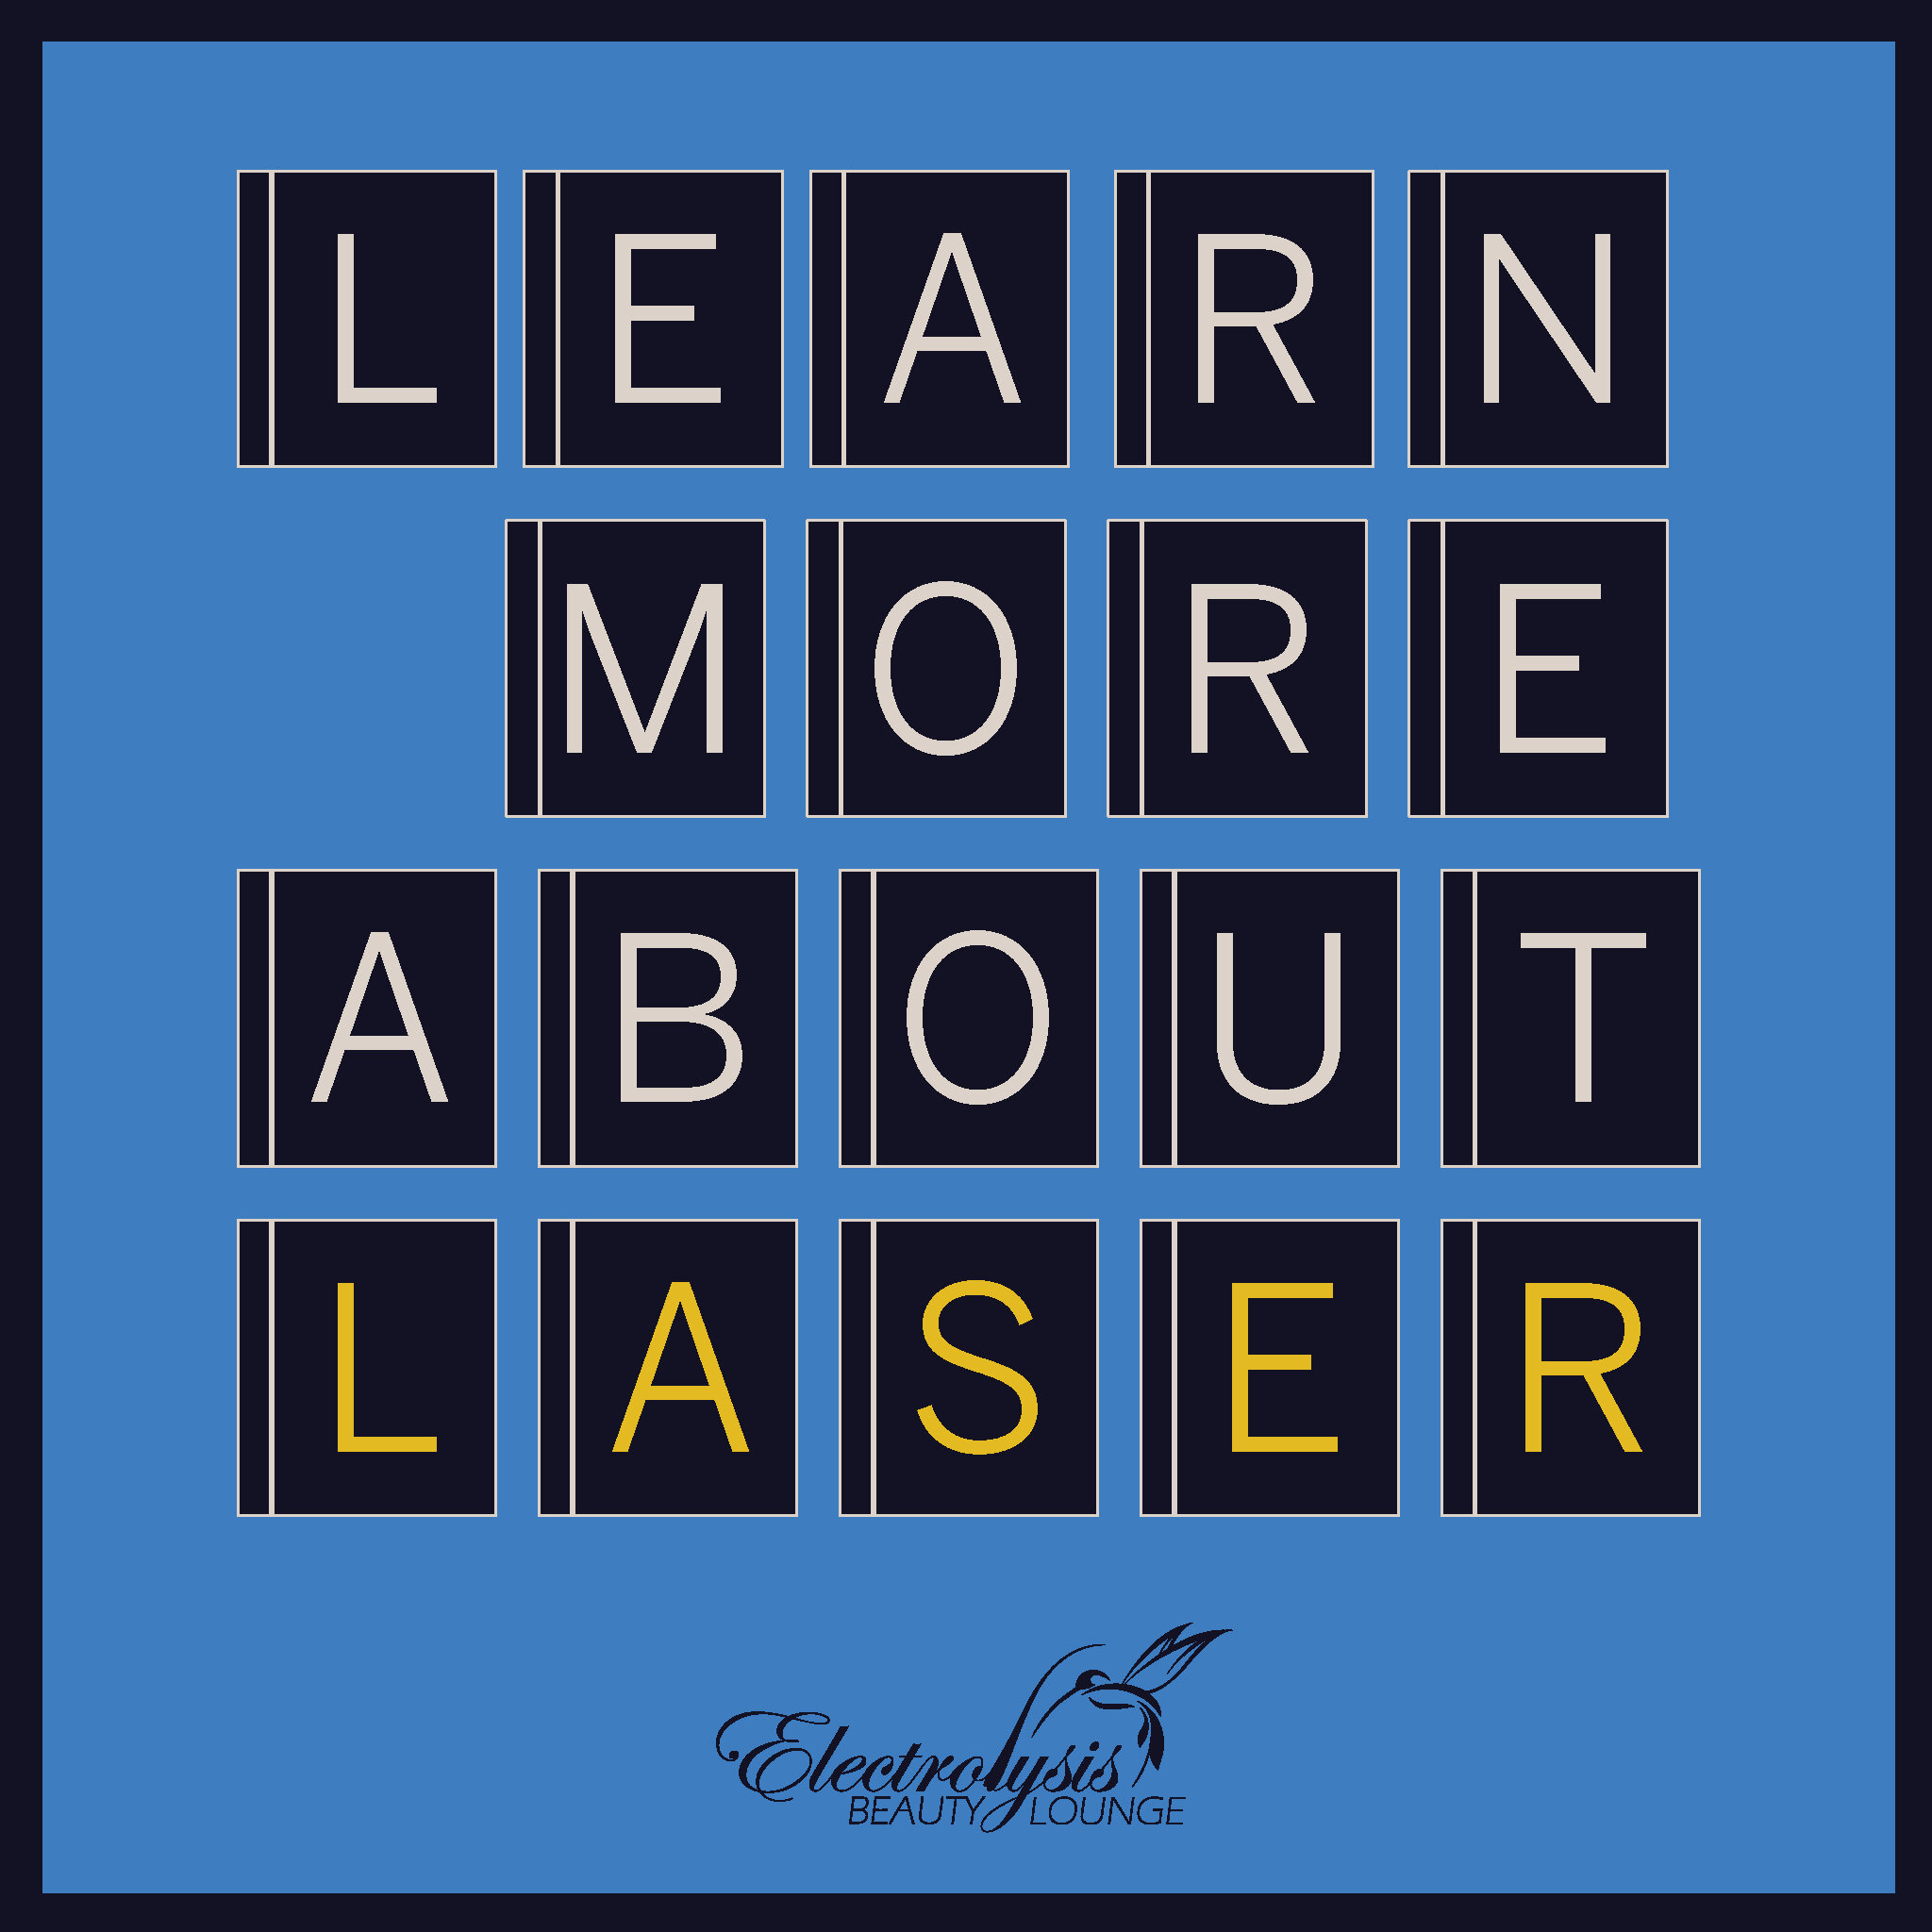 Learn More about Laser Hair Removal